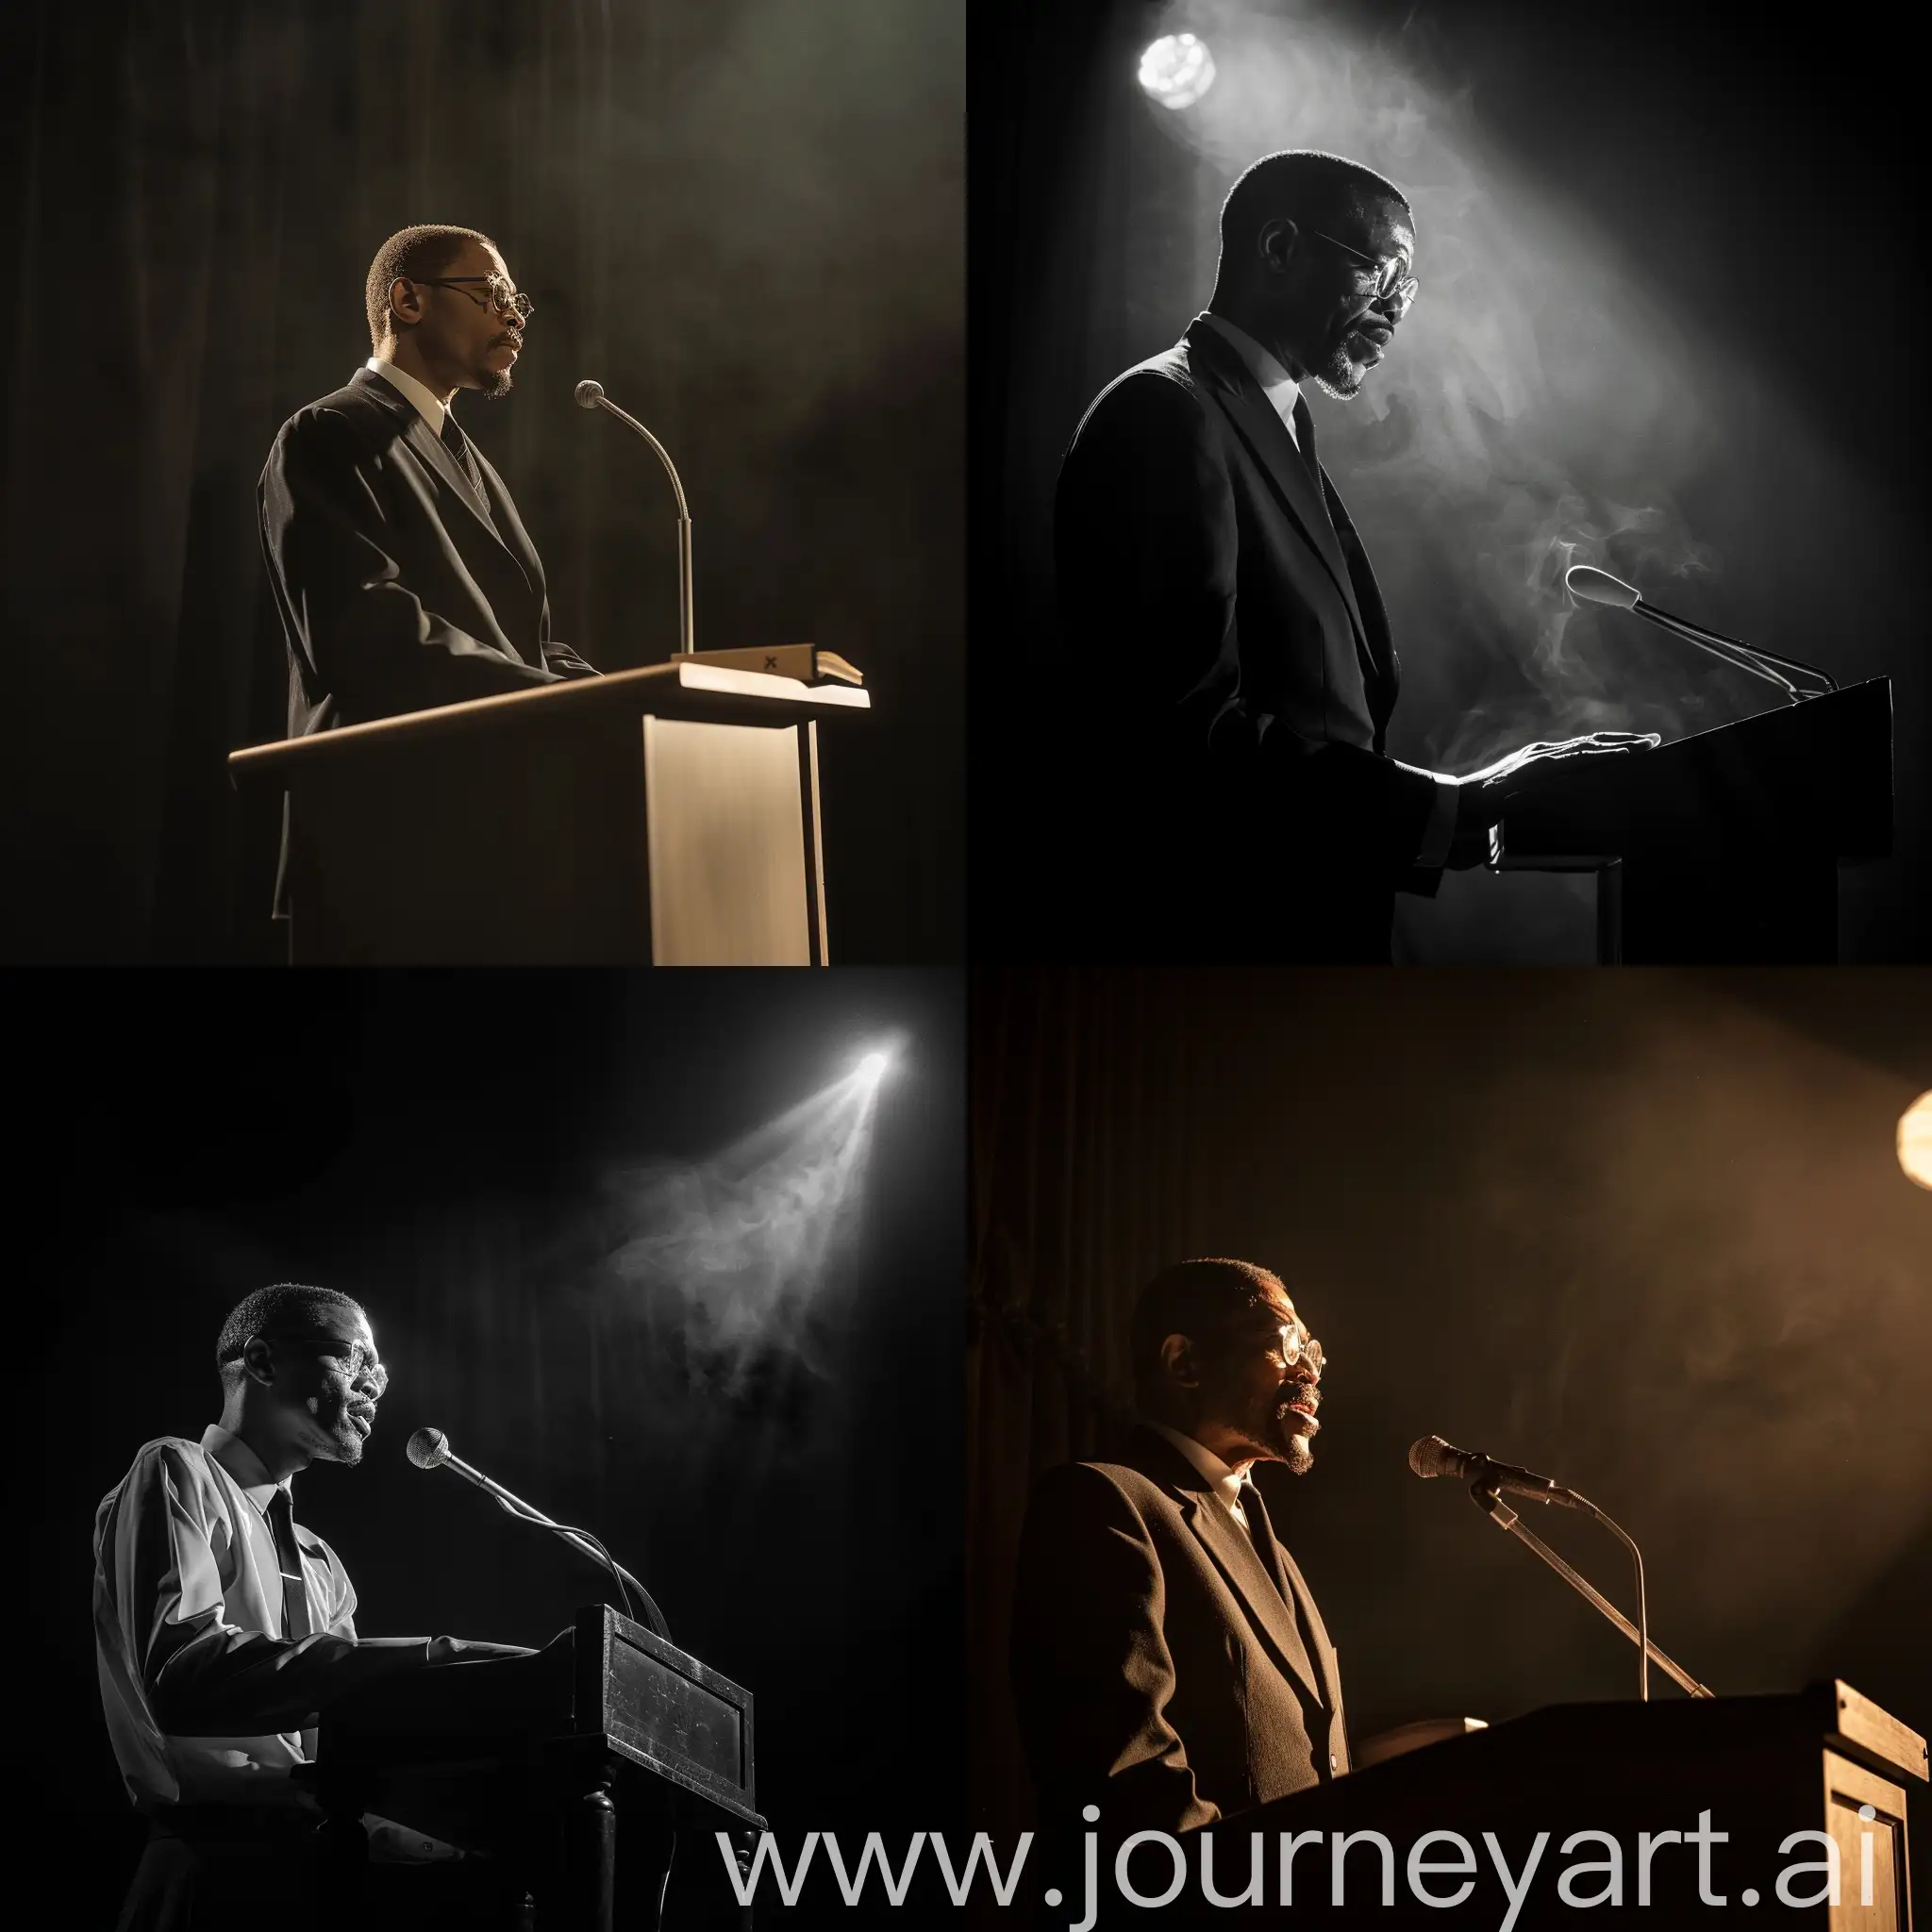 Malcolm X delivering a powerful speech at a lectern, cinematic lighting, realistic image